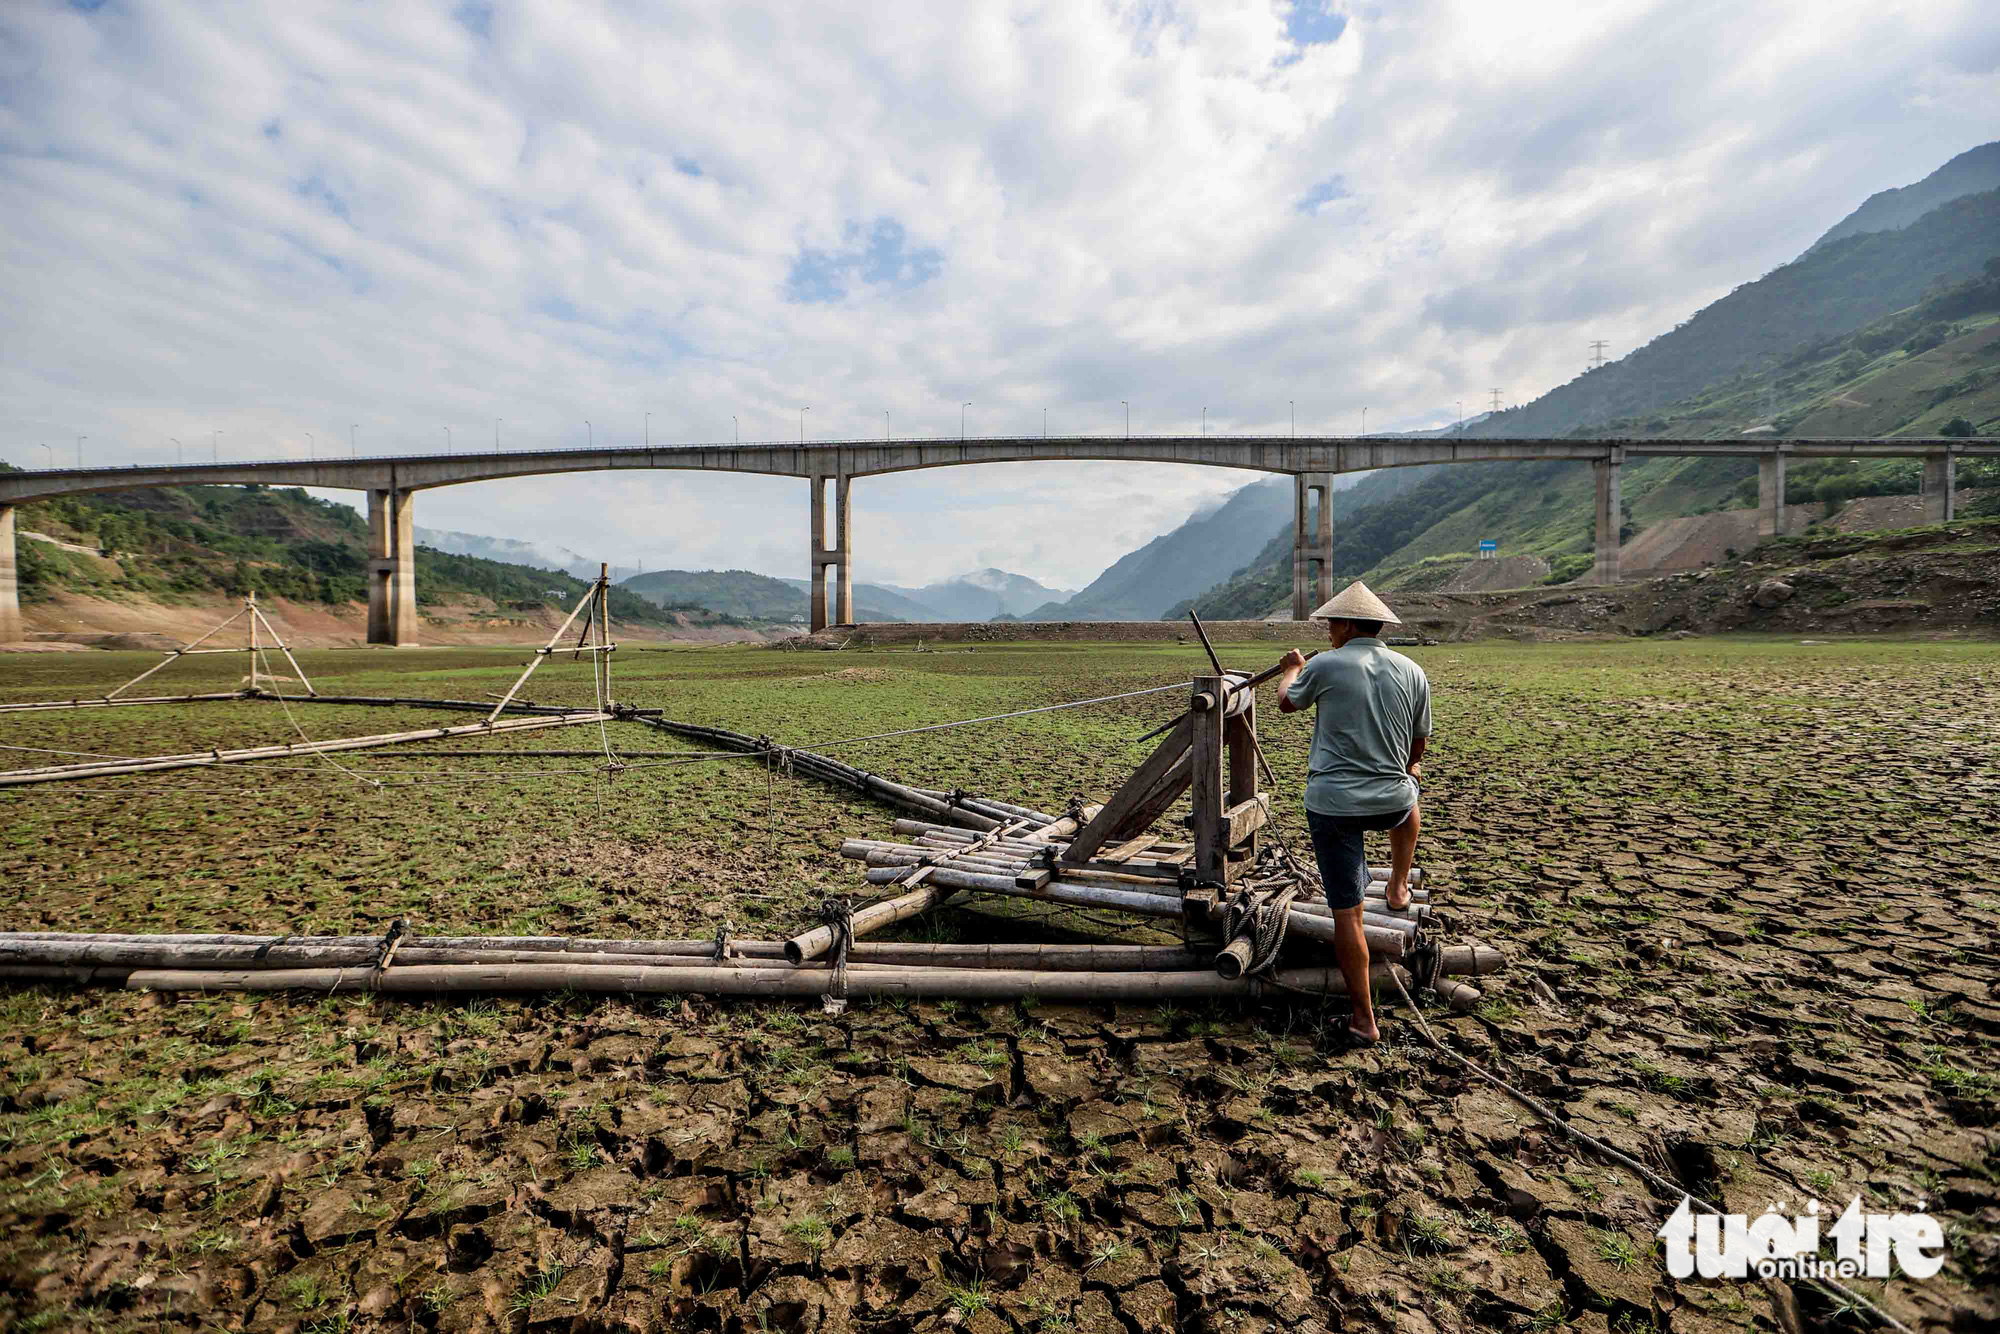 Vang Van Vuong, a local inhabitant in the Son La hydropower reservoir area, stands next to his family’s lift net on the dried-up reservoir bed. Photo: Nguyen Khanh / Tuoi Tre